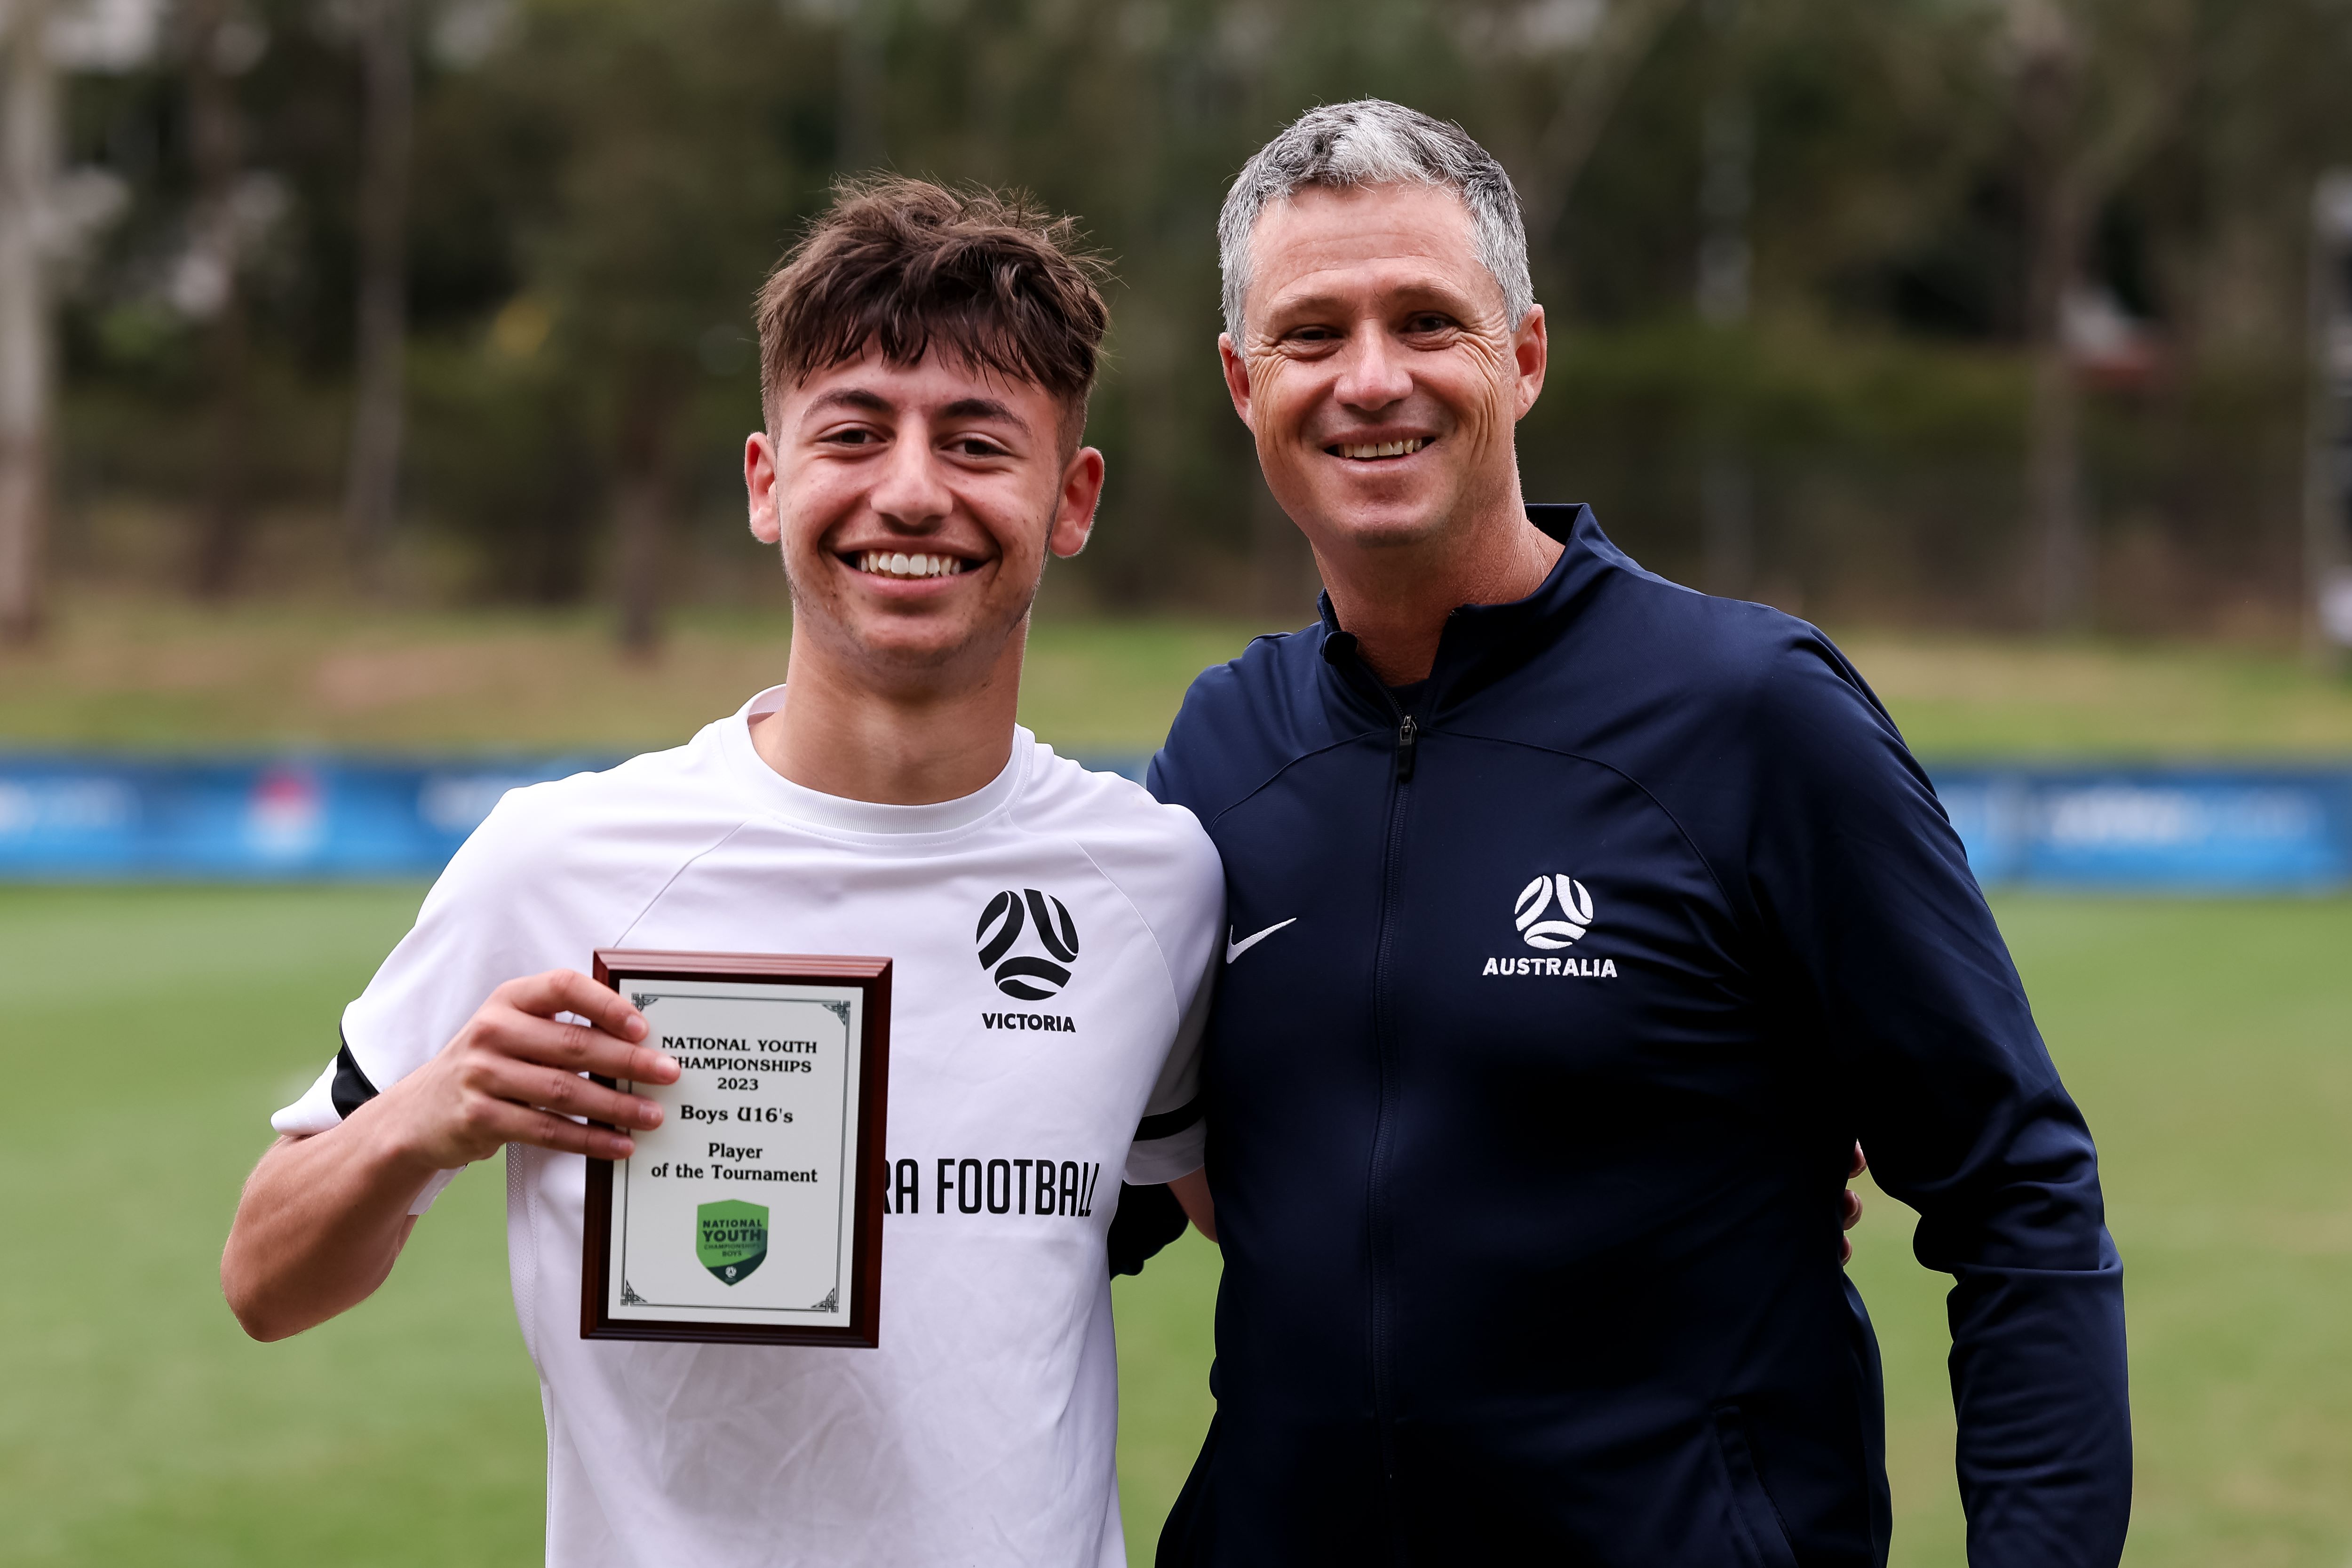 Christian Polyzoudis was awarded the Under 16 Player of the Tournament by Trevor Morgan